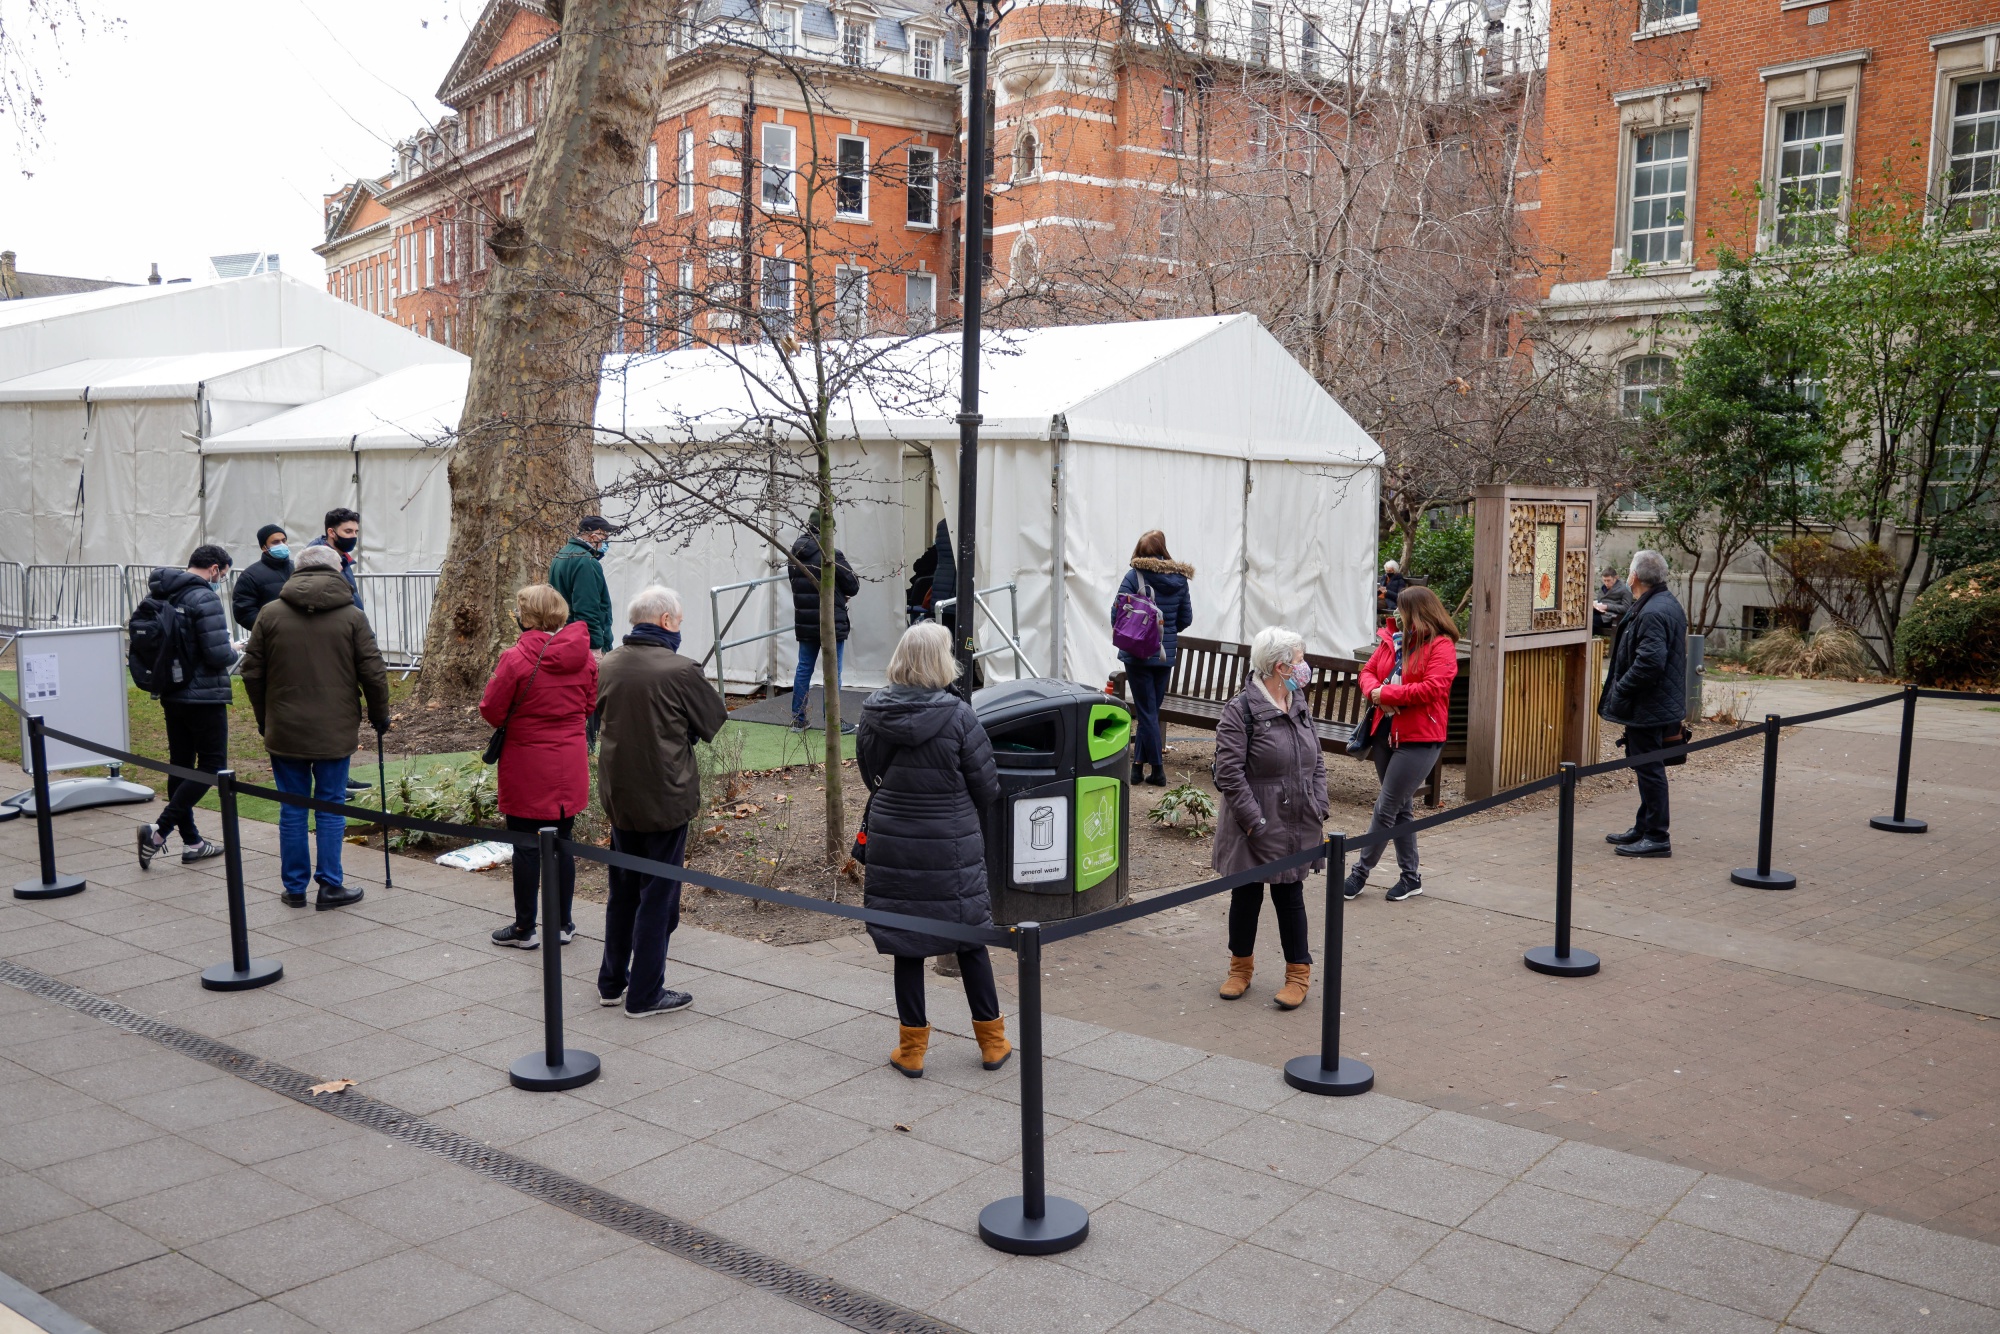 Visitors queue outside a Covid-19 vaccination center&nbsp;at Guys hospital in London, on Jan. 11.